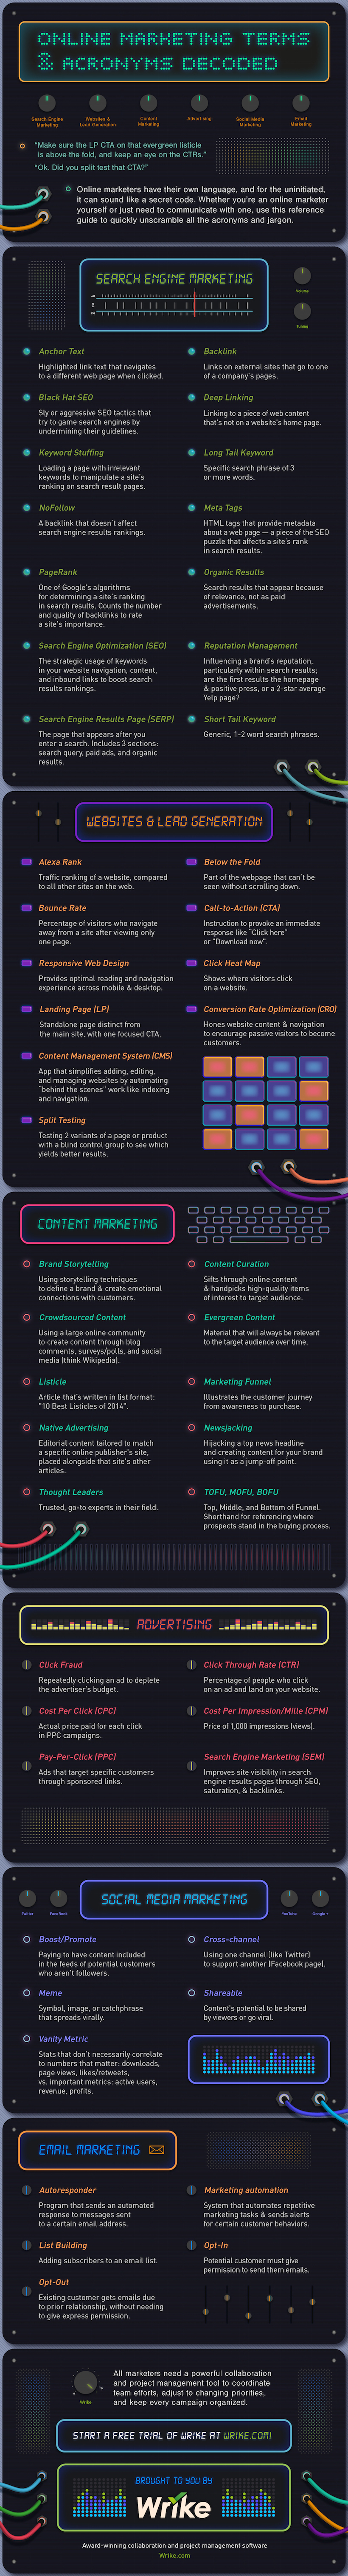 Digital Marketing Terms Infographic